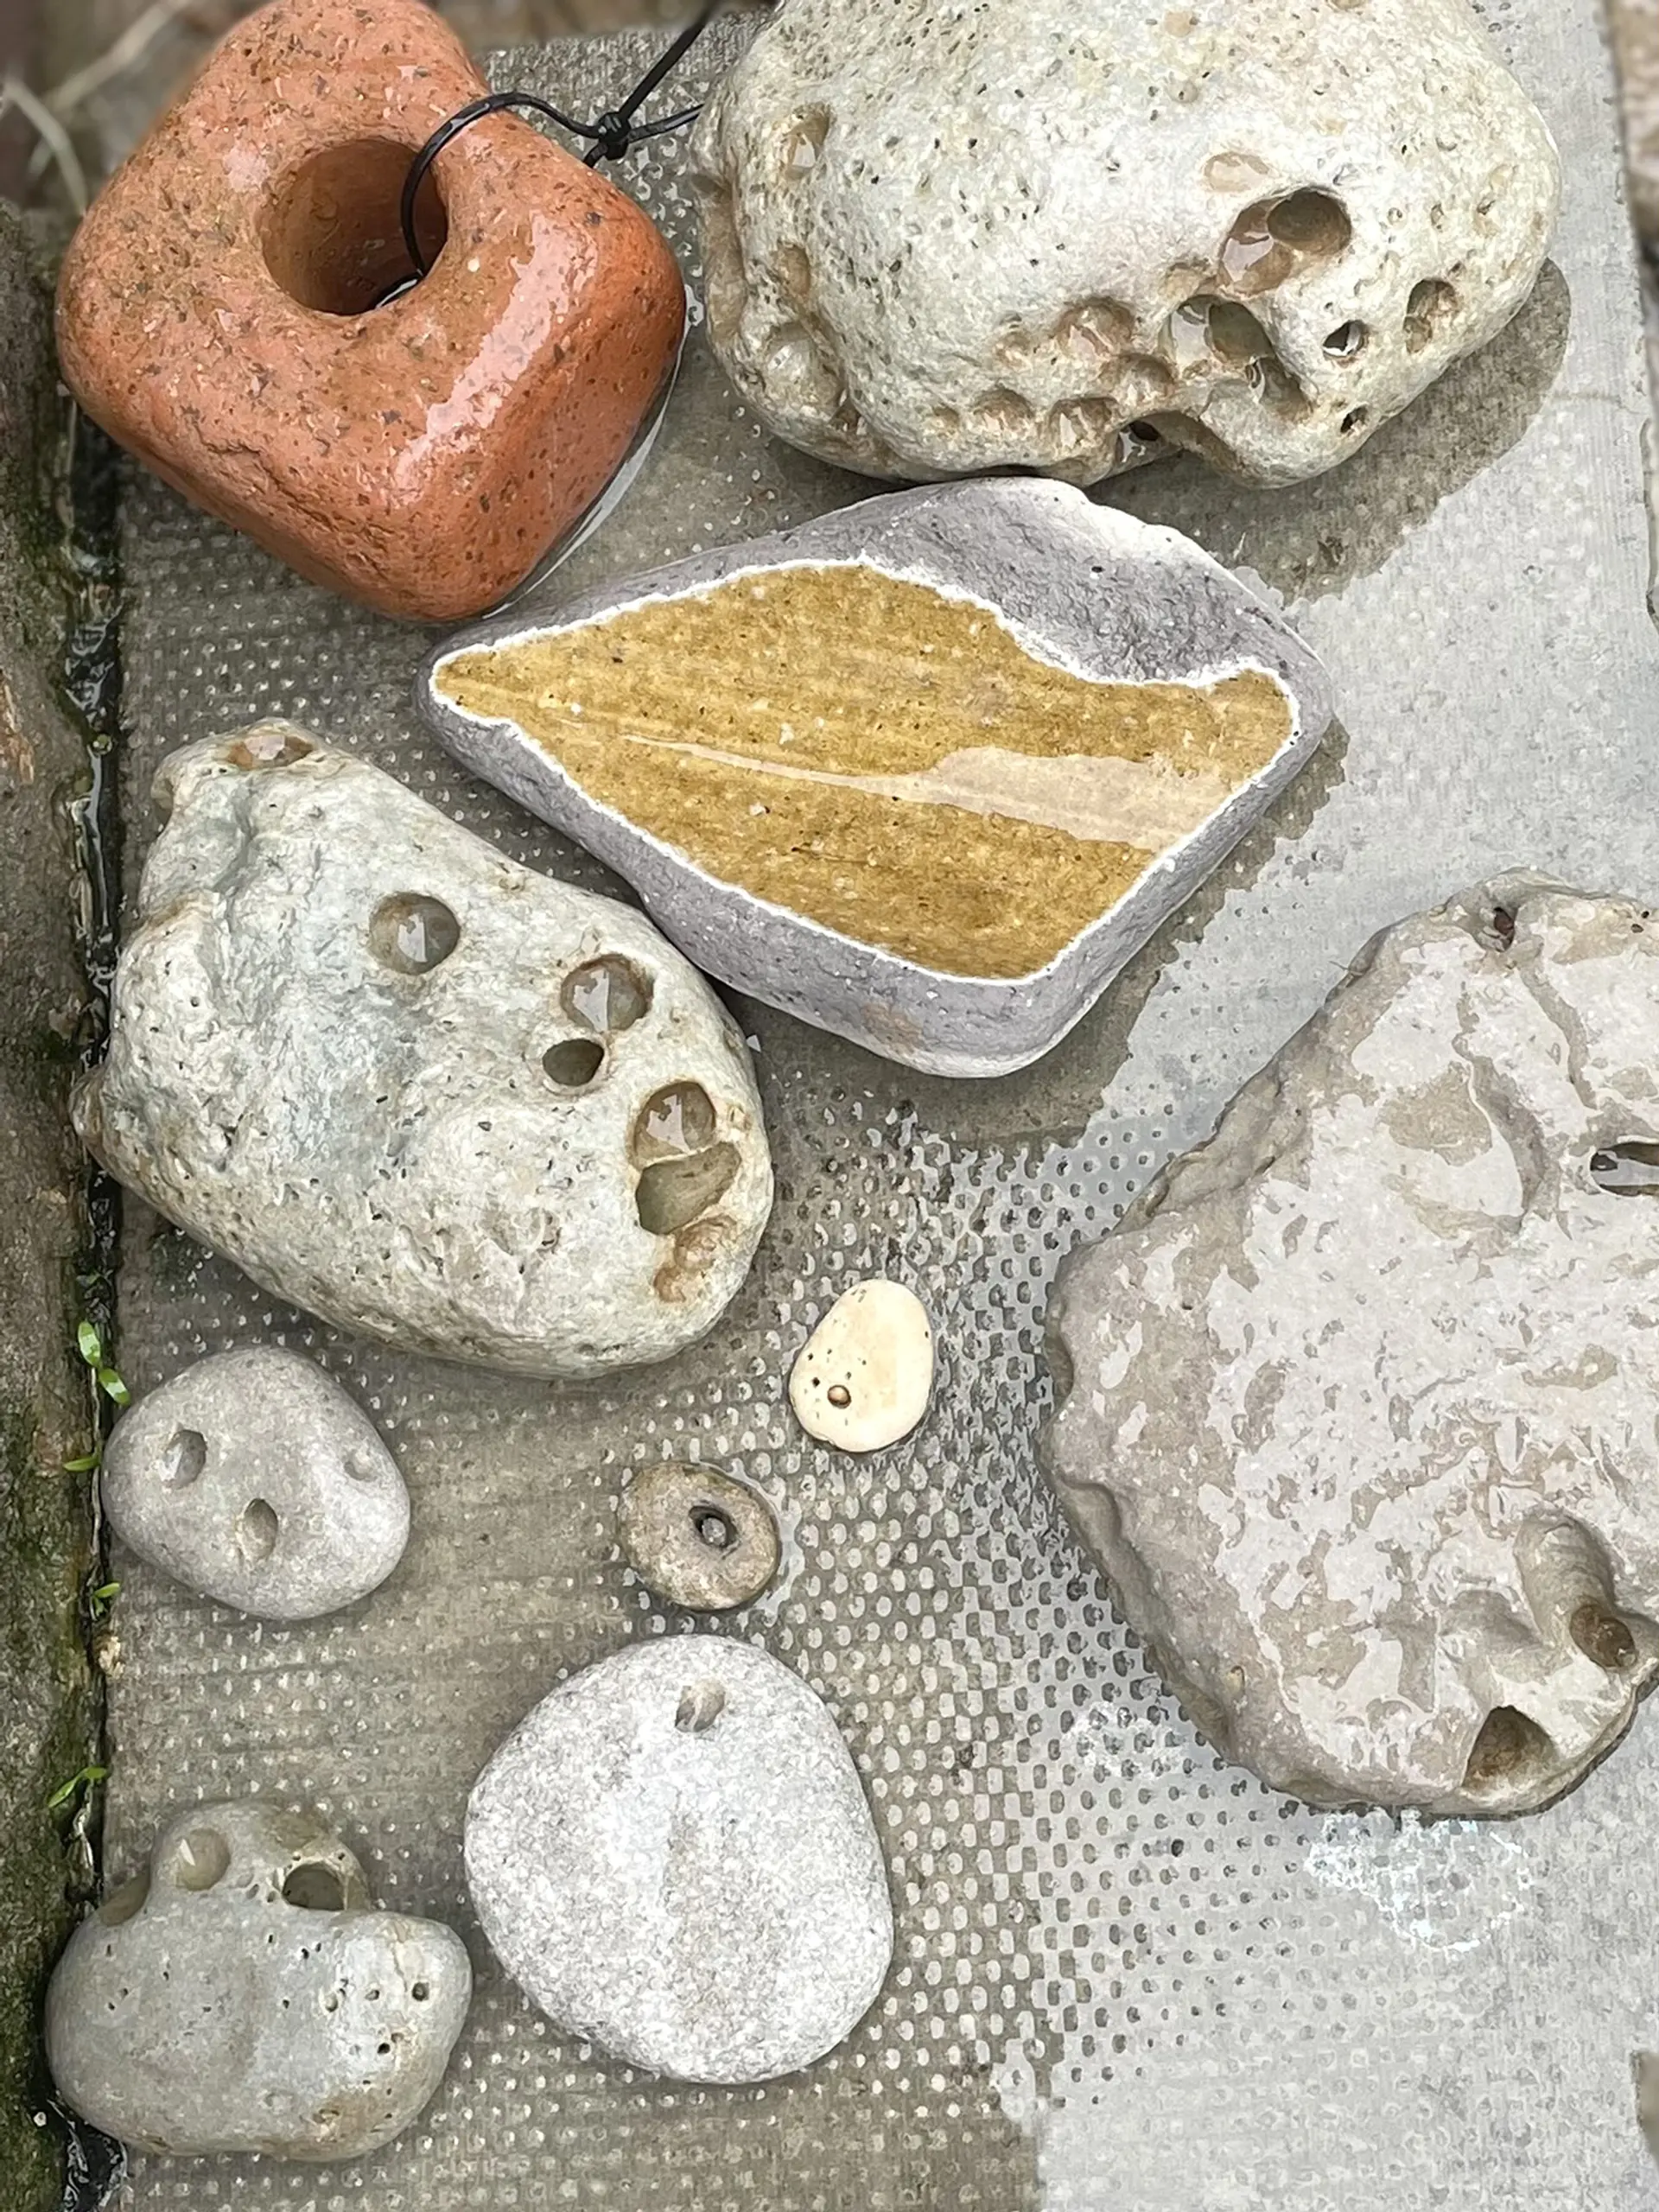  Beach finds Outside, rocks from the back are arranged on a concrete step. They are wet with rain.